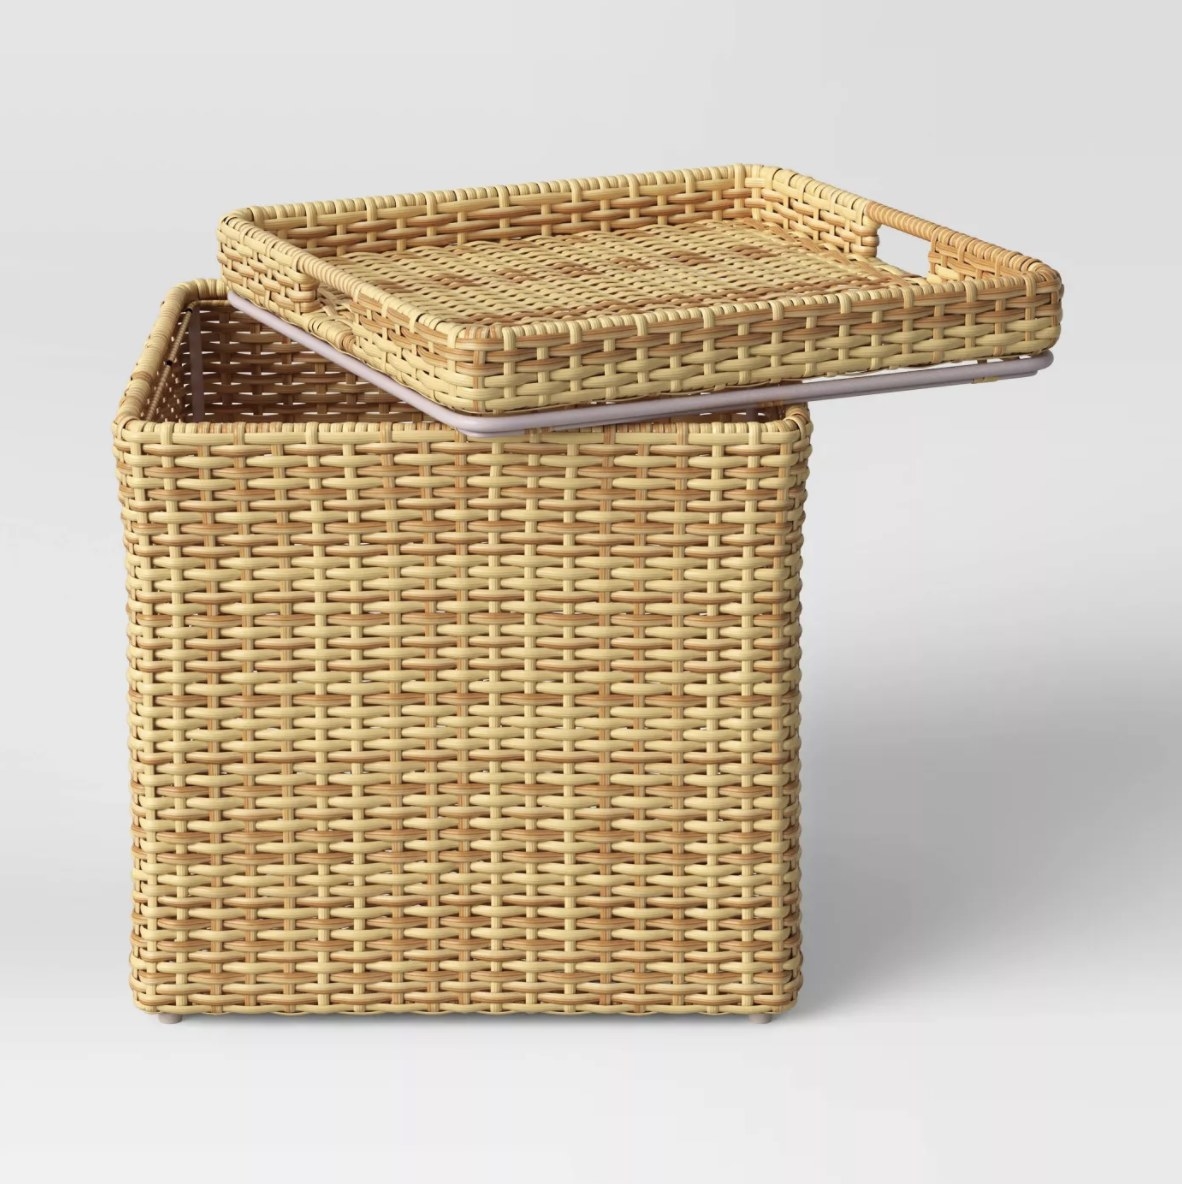 The light yellow-brown wicker table has a light pink seal on the bottom of the lid